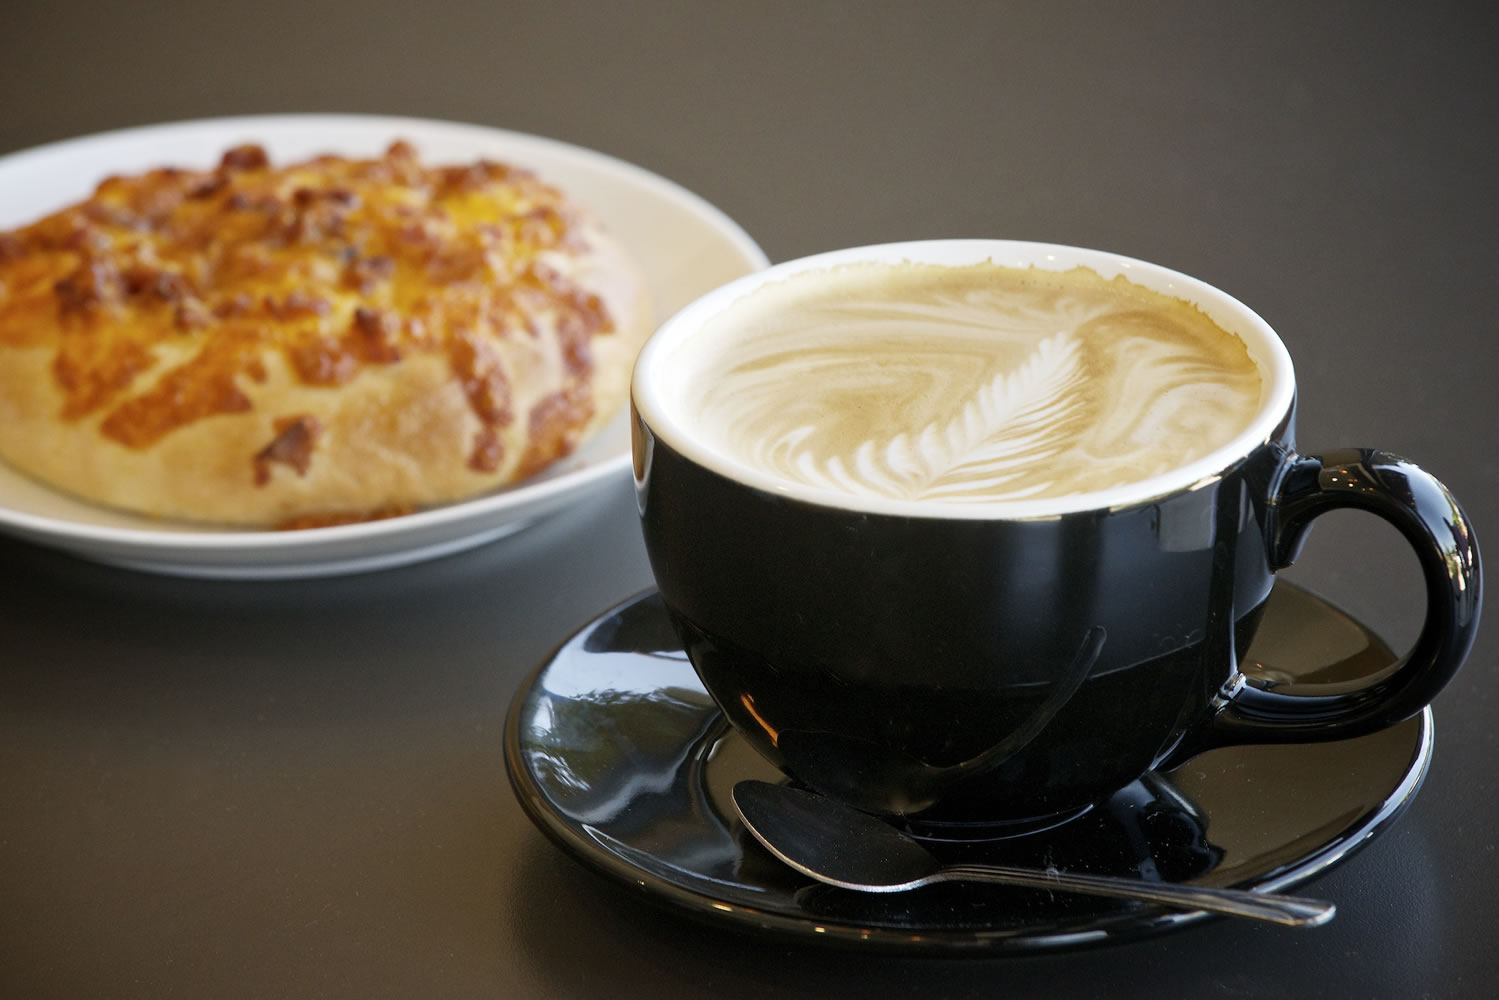 A bacon and cheese bagel and a vanilla honey latte are two of the treats available at Fairway Coffee, in the WinCo shopping center along Highway 503.